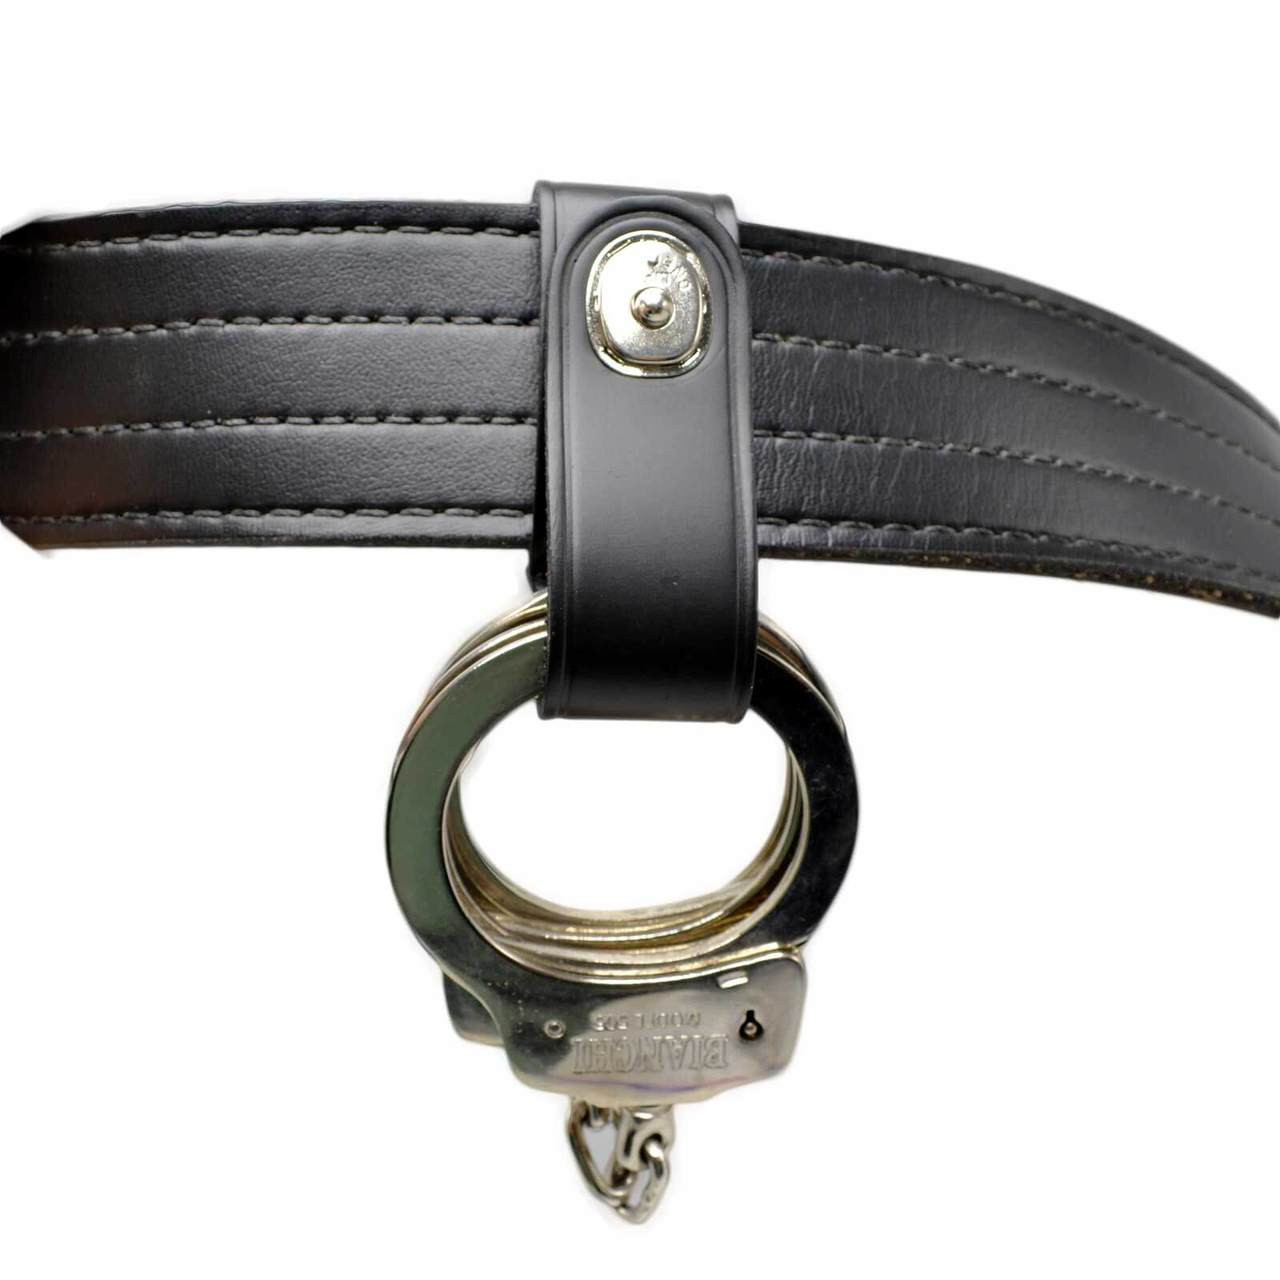 Perfect Fit Handcuff Strap with Safety Snap | Standard Handcuff Strap ...